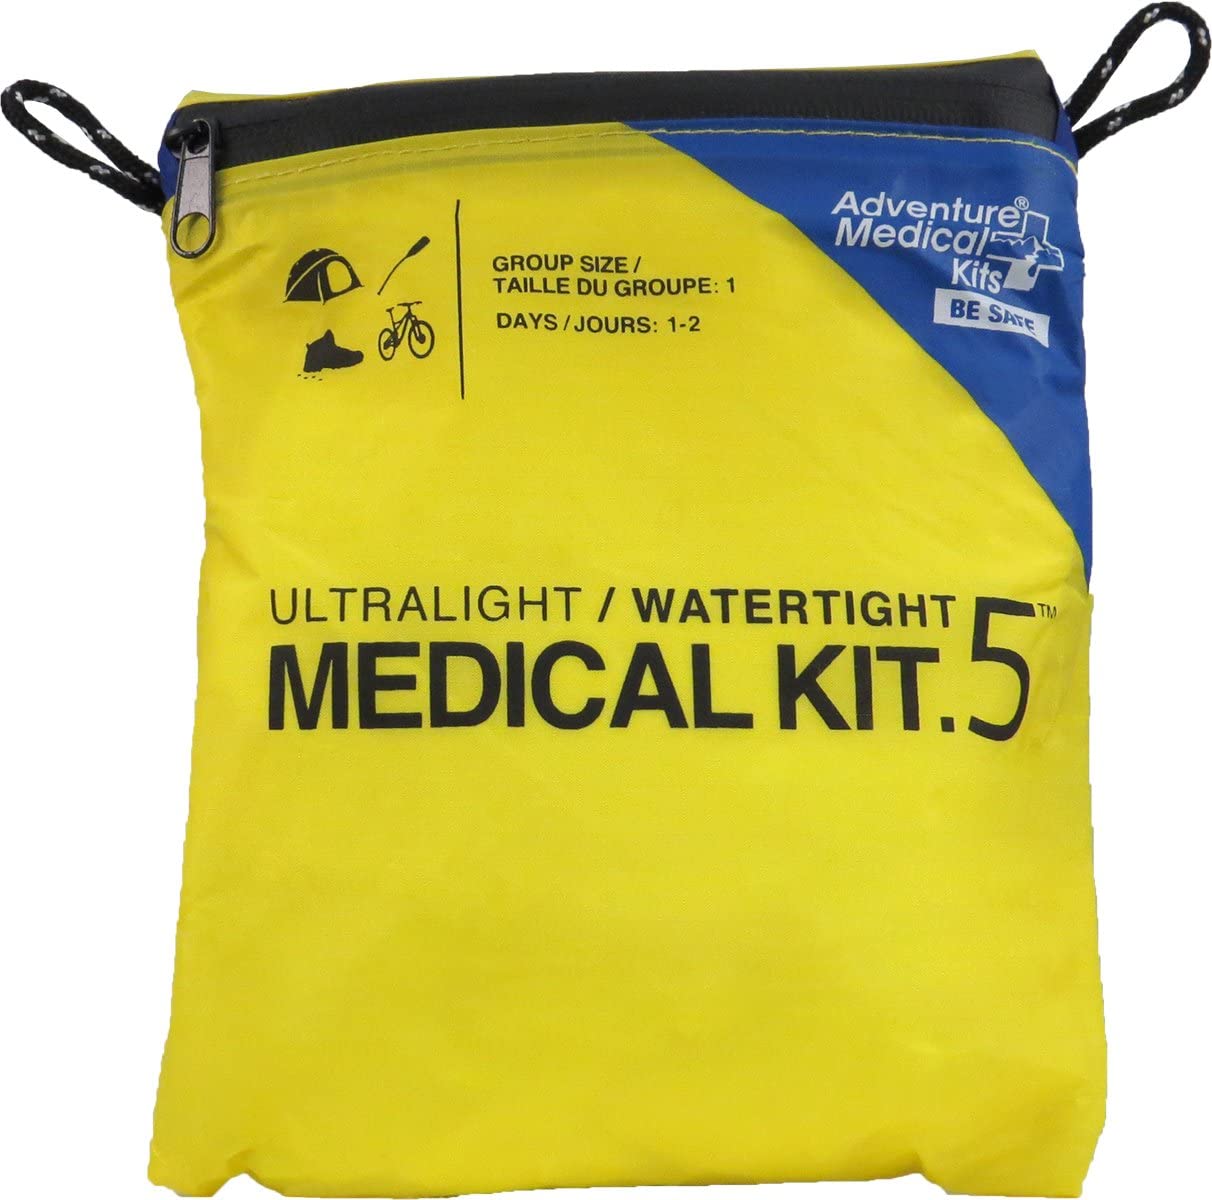 Holthaus Medical kit large DIN 13164 - Buy outdoor gear for your adventure